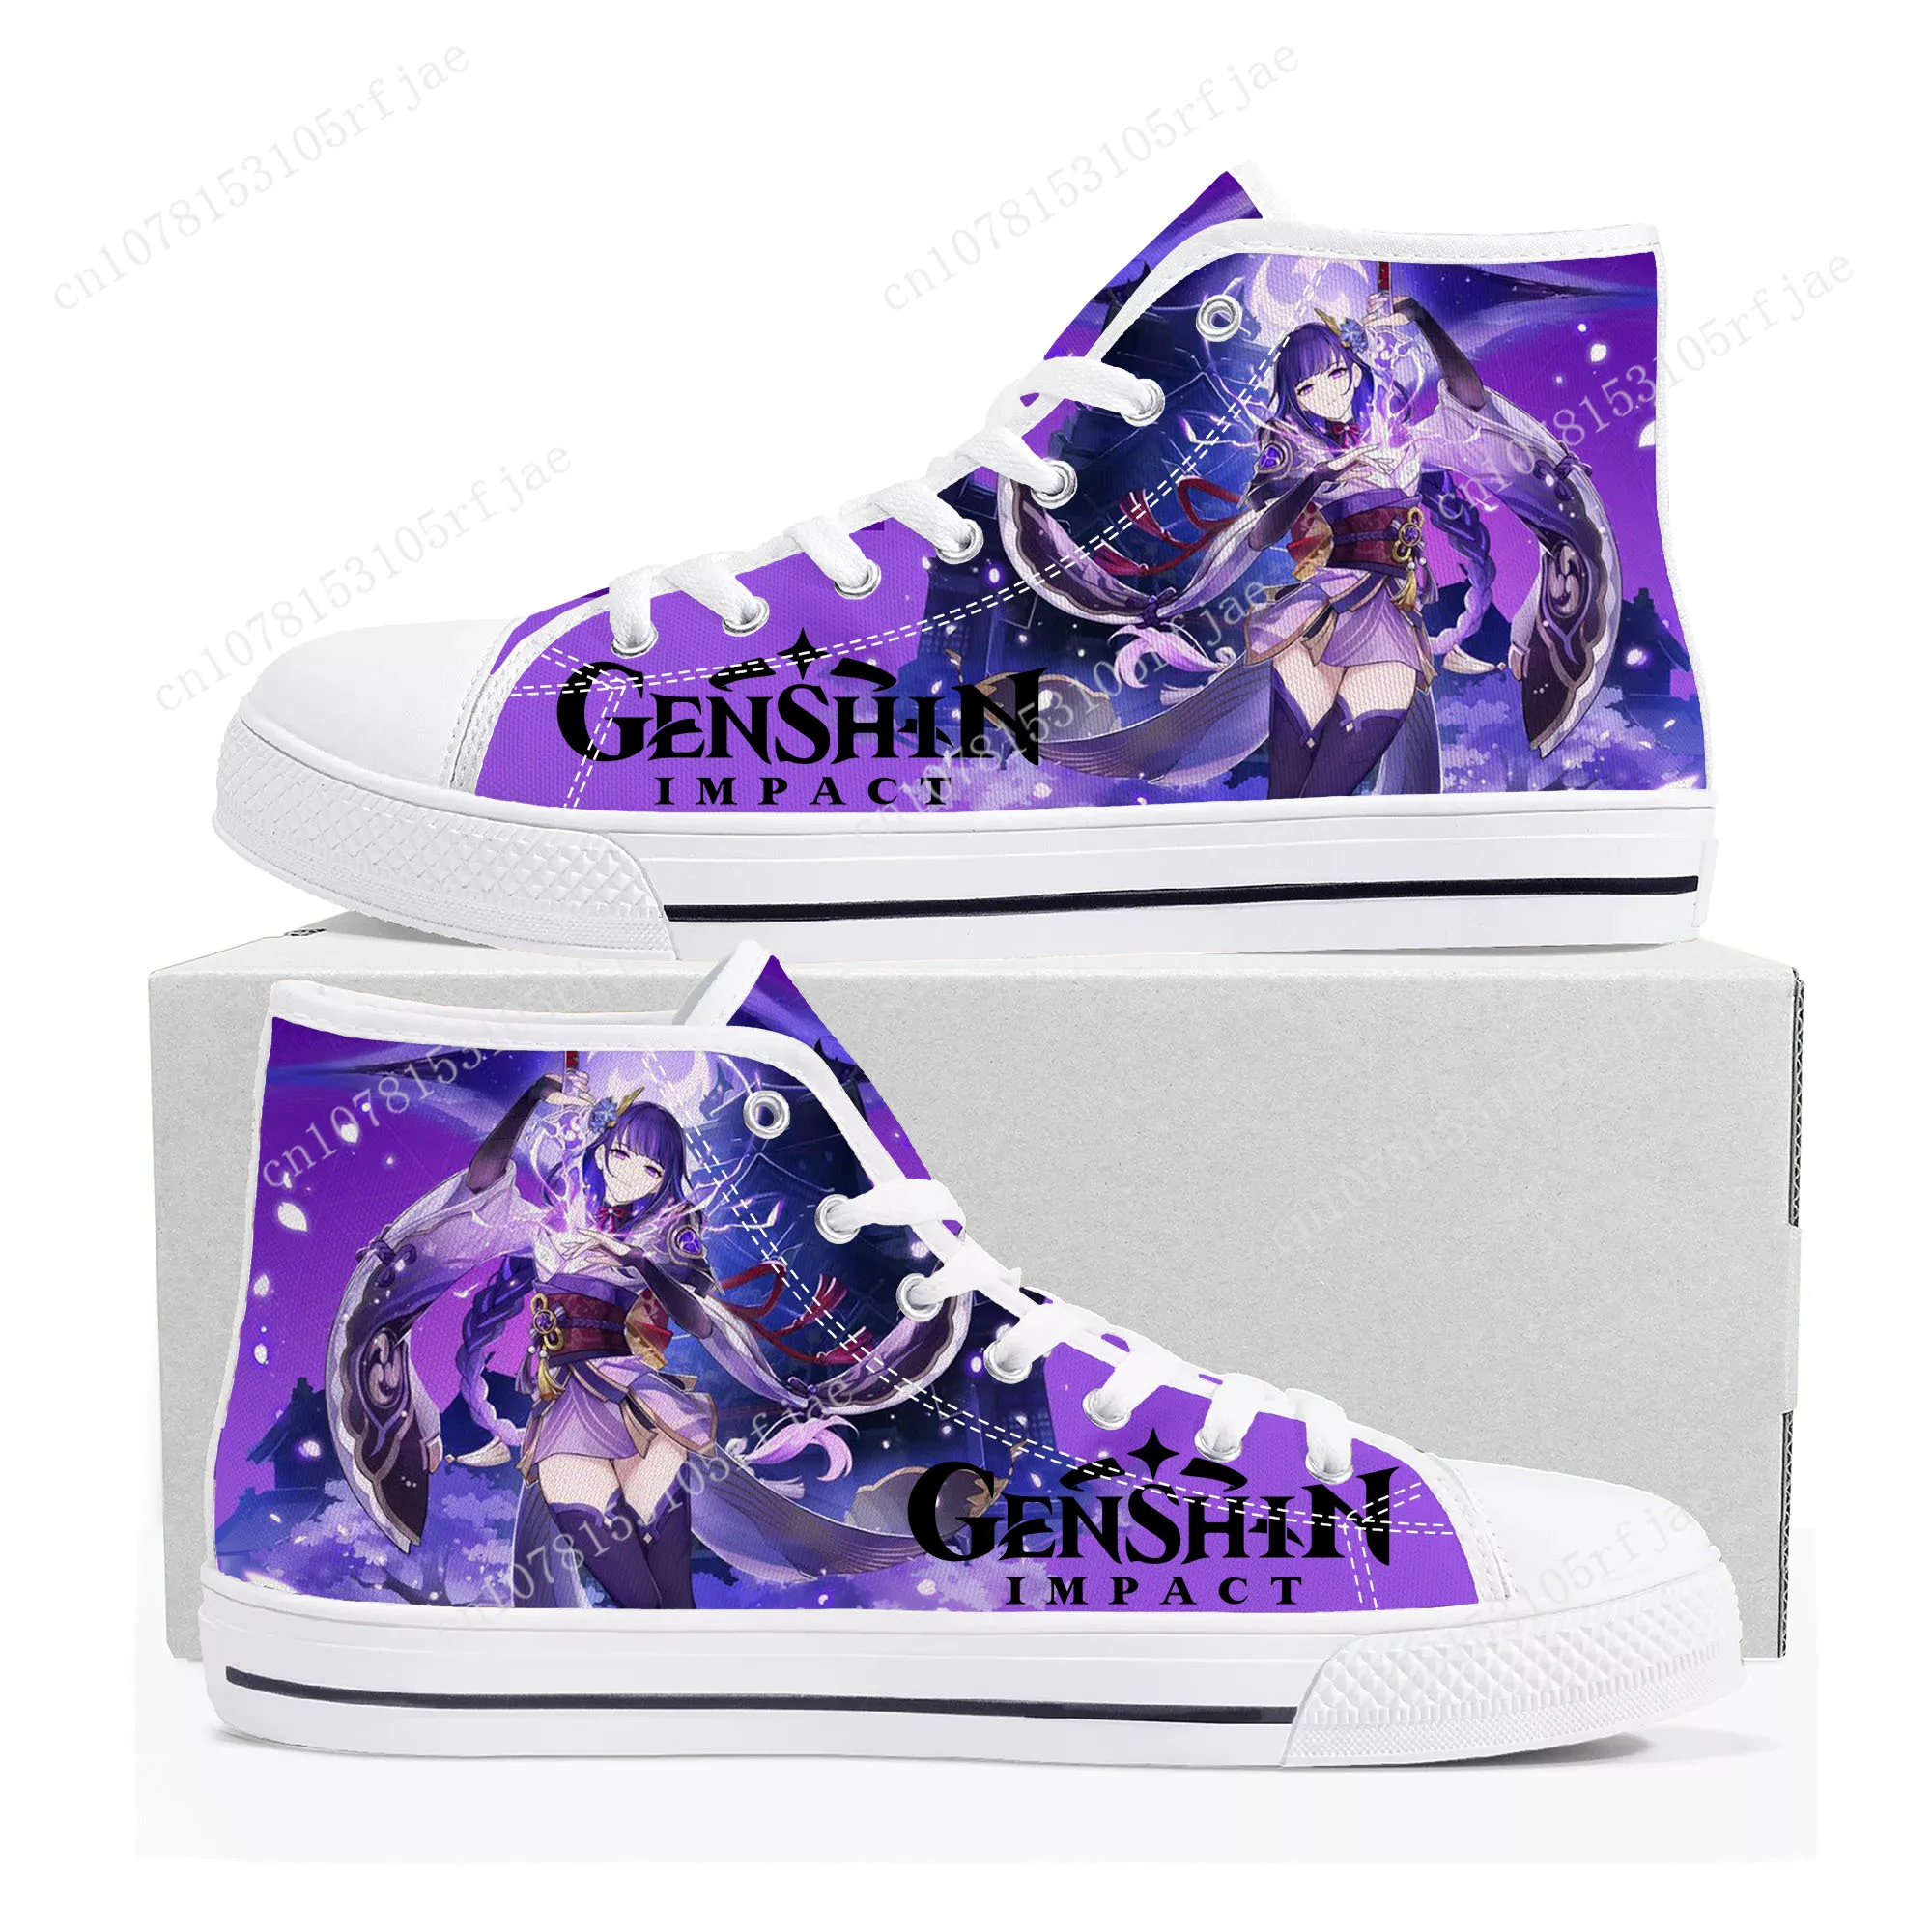 

Anime Cartoon Game Genshin Impact High Top Sneakers Mens Womens Teenager High Quality Canvas Shoes Casual Tailor Made Sneaker